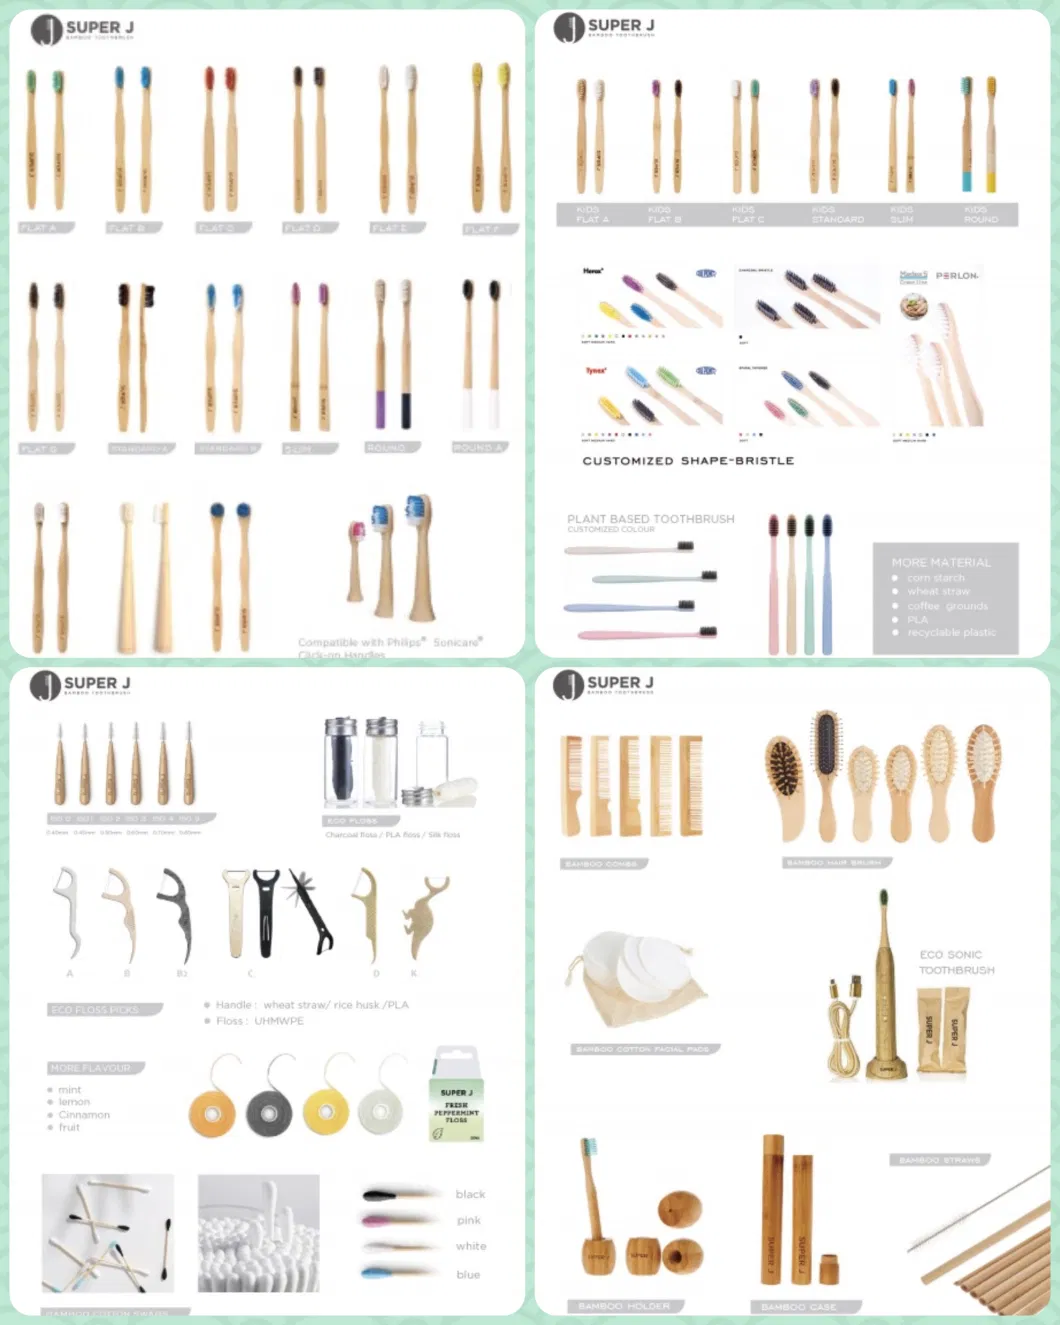 100% Natural Bamboo Toothbrush Biodegradable Bamboo Biodegradable Soft Wooden Brush Bristles Customized Color and Size